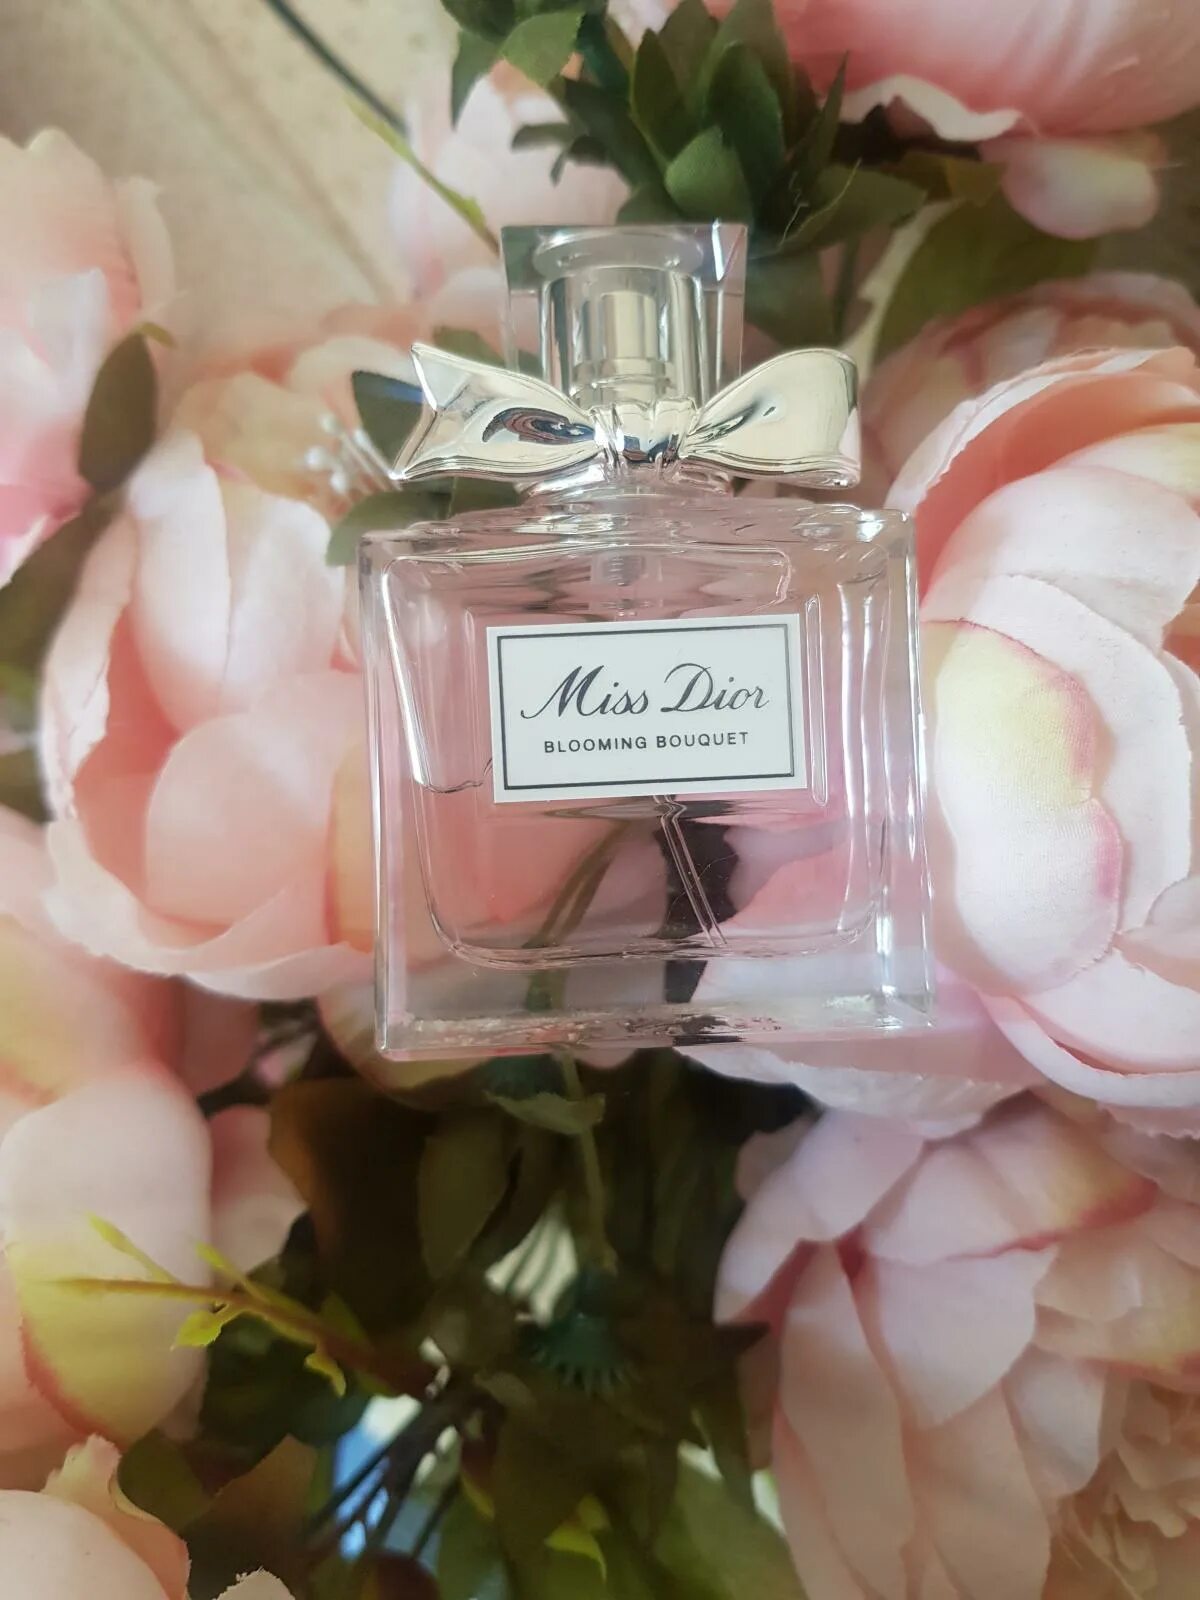 Christian Dior Miss Dior Blooming Bouquet. Miss Dior Cherie Blooming Bouquet. Духи Miss Dior Blooming. Духи диор Blooming Bouquet. Dior miss dior blooming bouquet цены